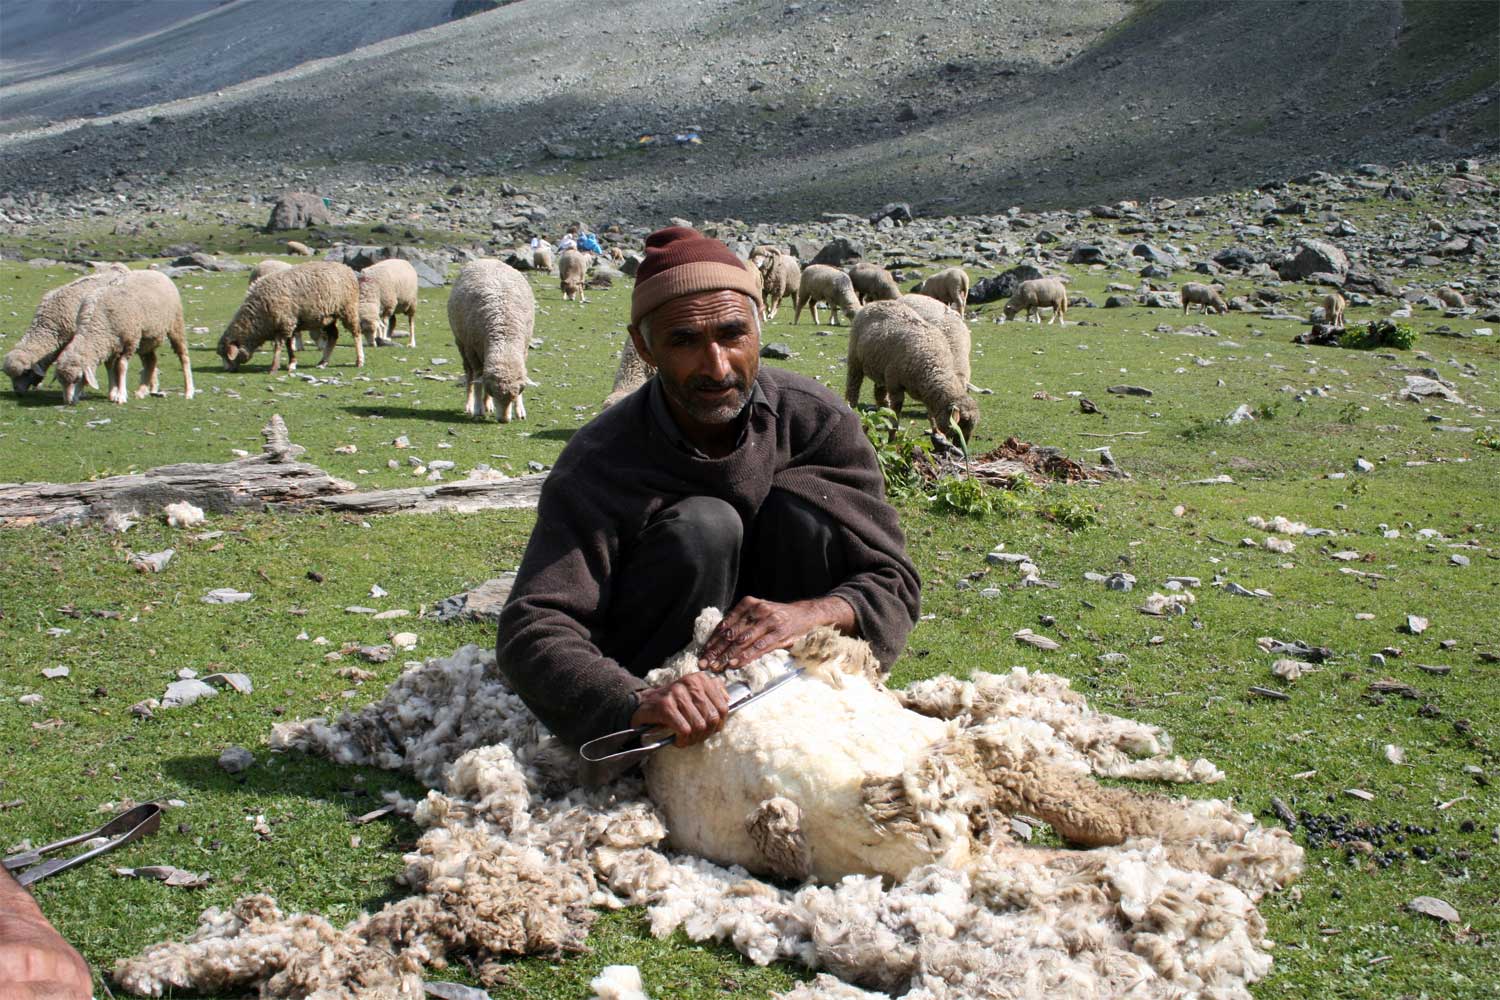 60% of the JK's revenue is generated by agriculture and animal husbandry  sectors' | Free Press Kashmir